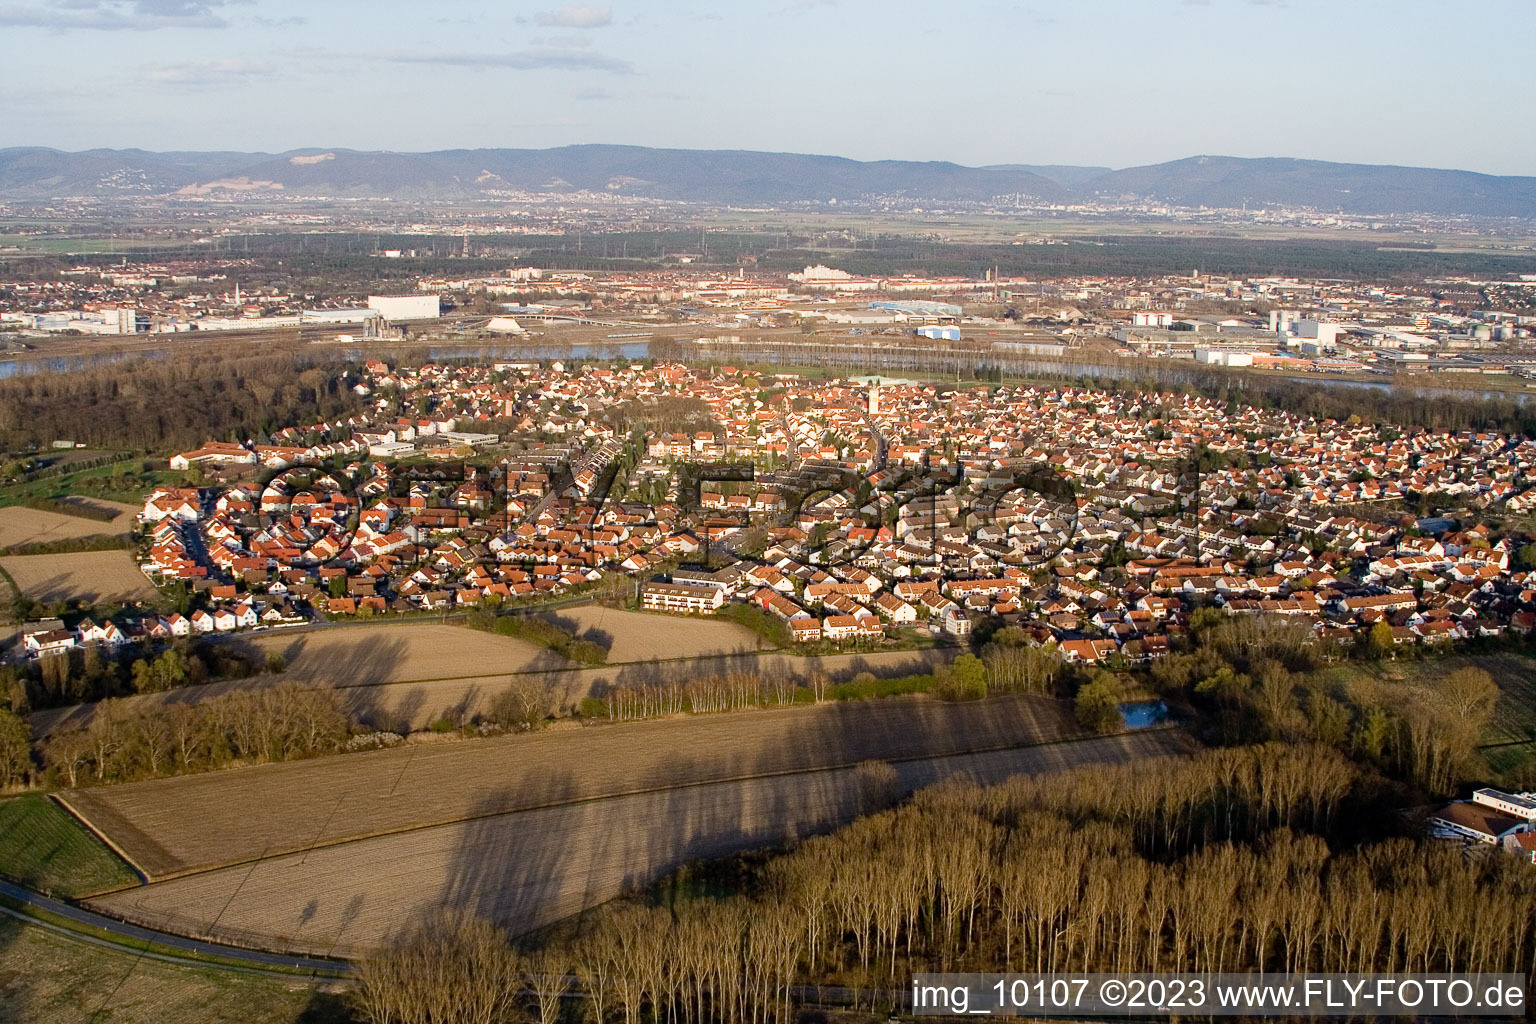 Altrip in the state Rhineland-Palatinate, Germany out of the air